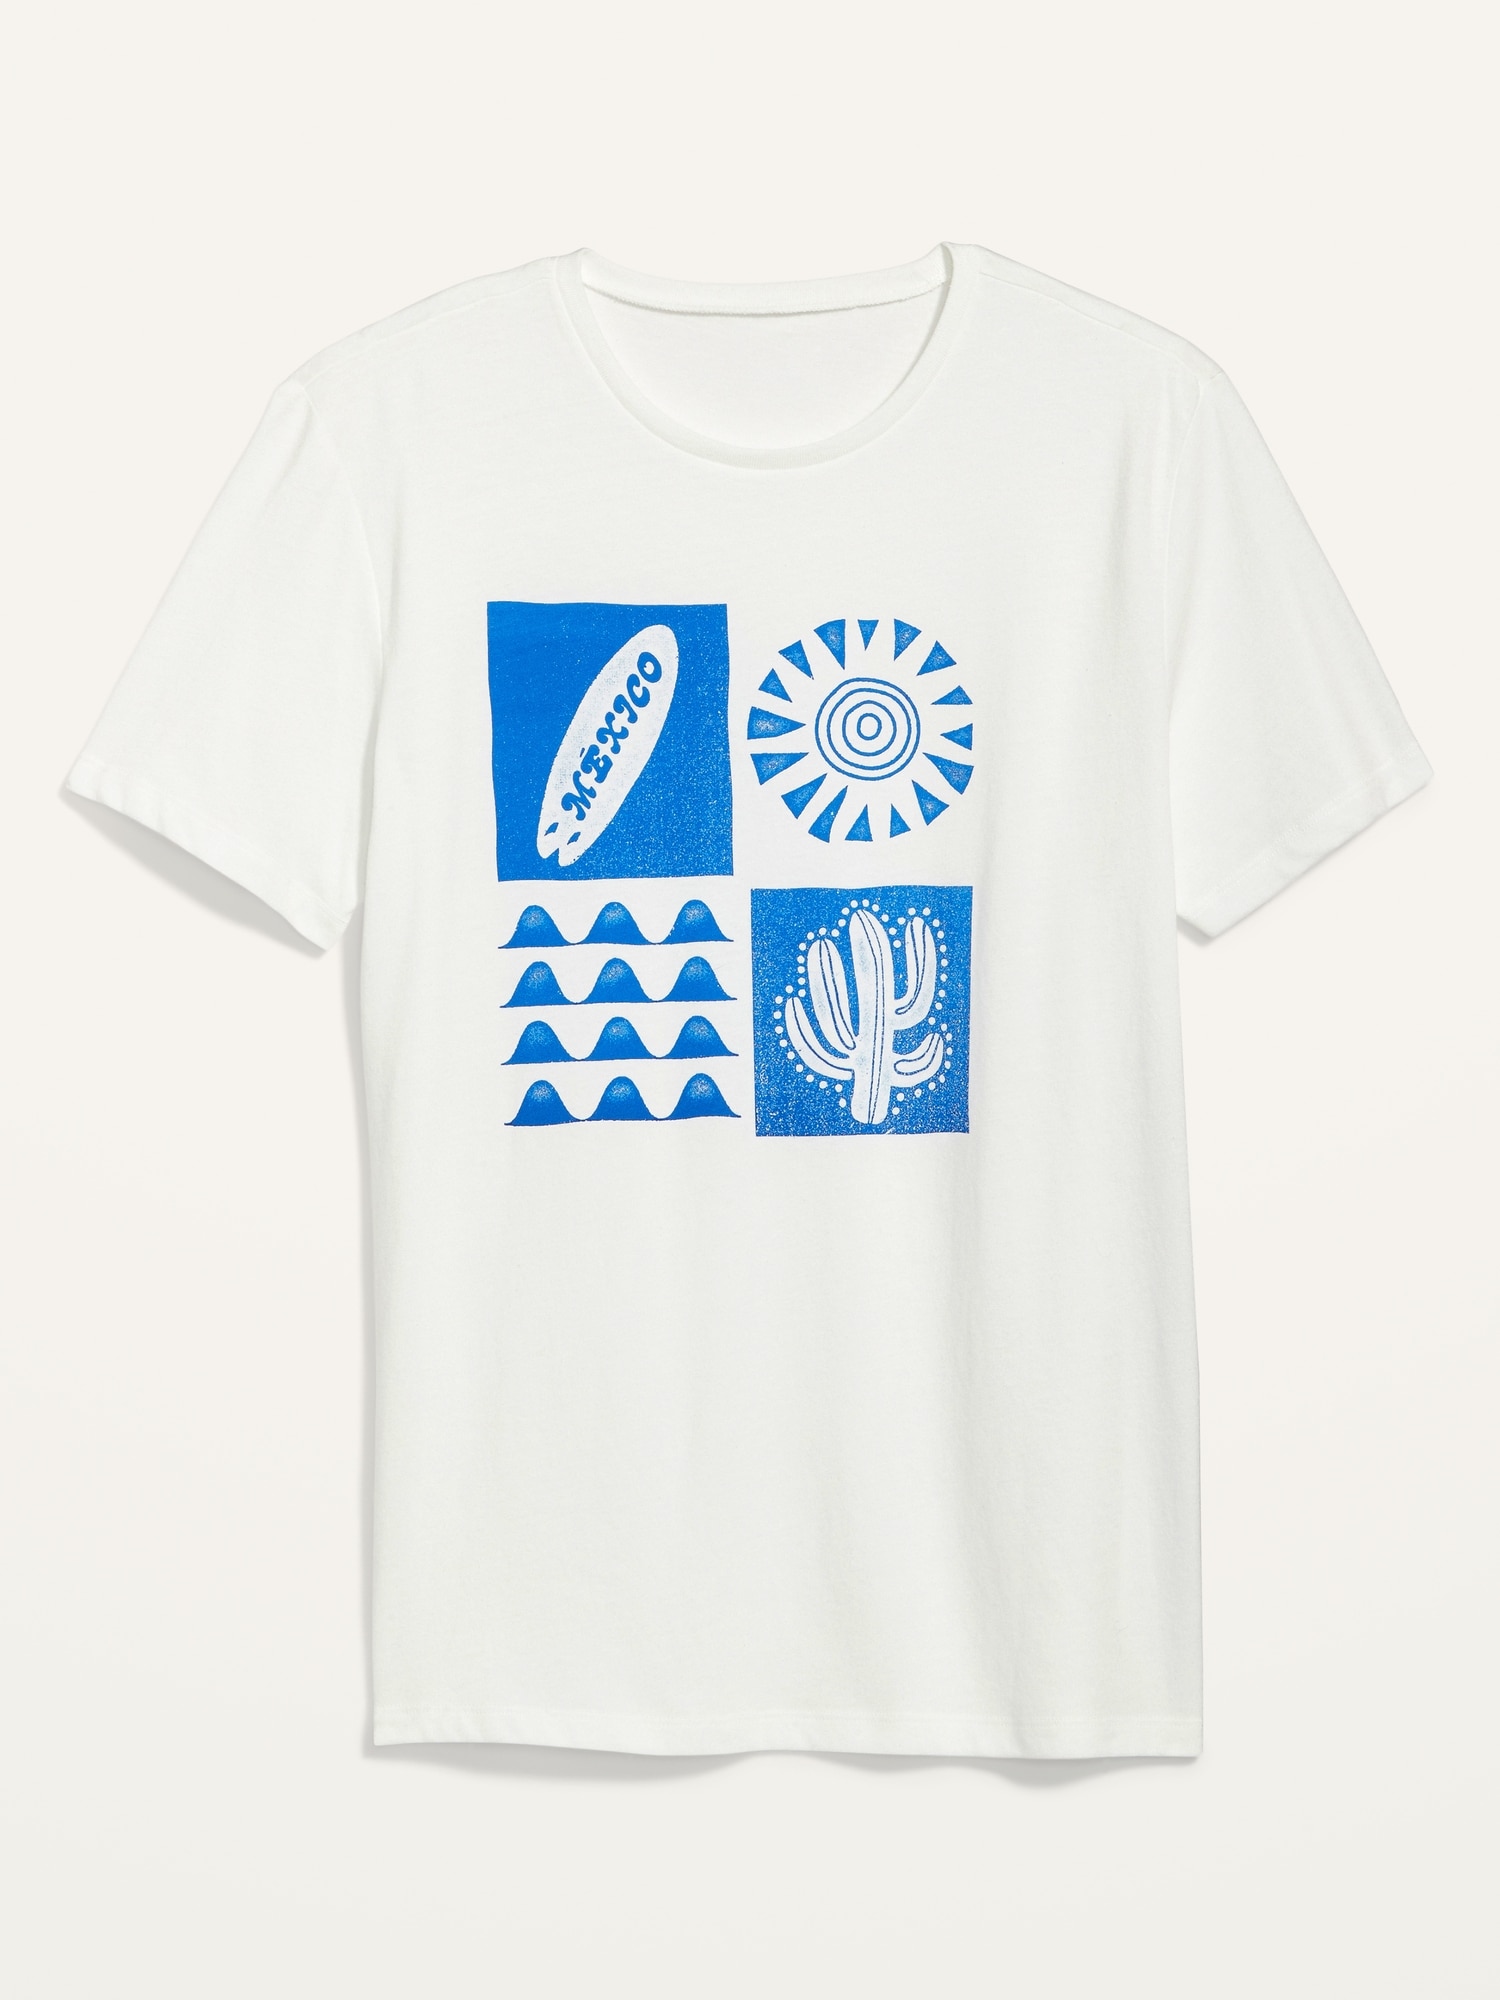 Matching Graphic T-Shirt for Men | Old Navy